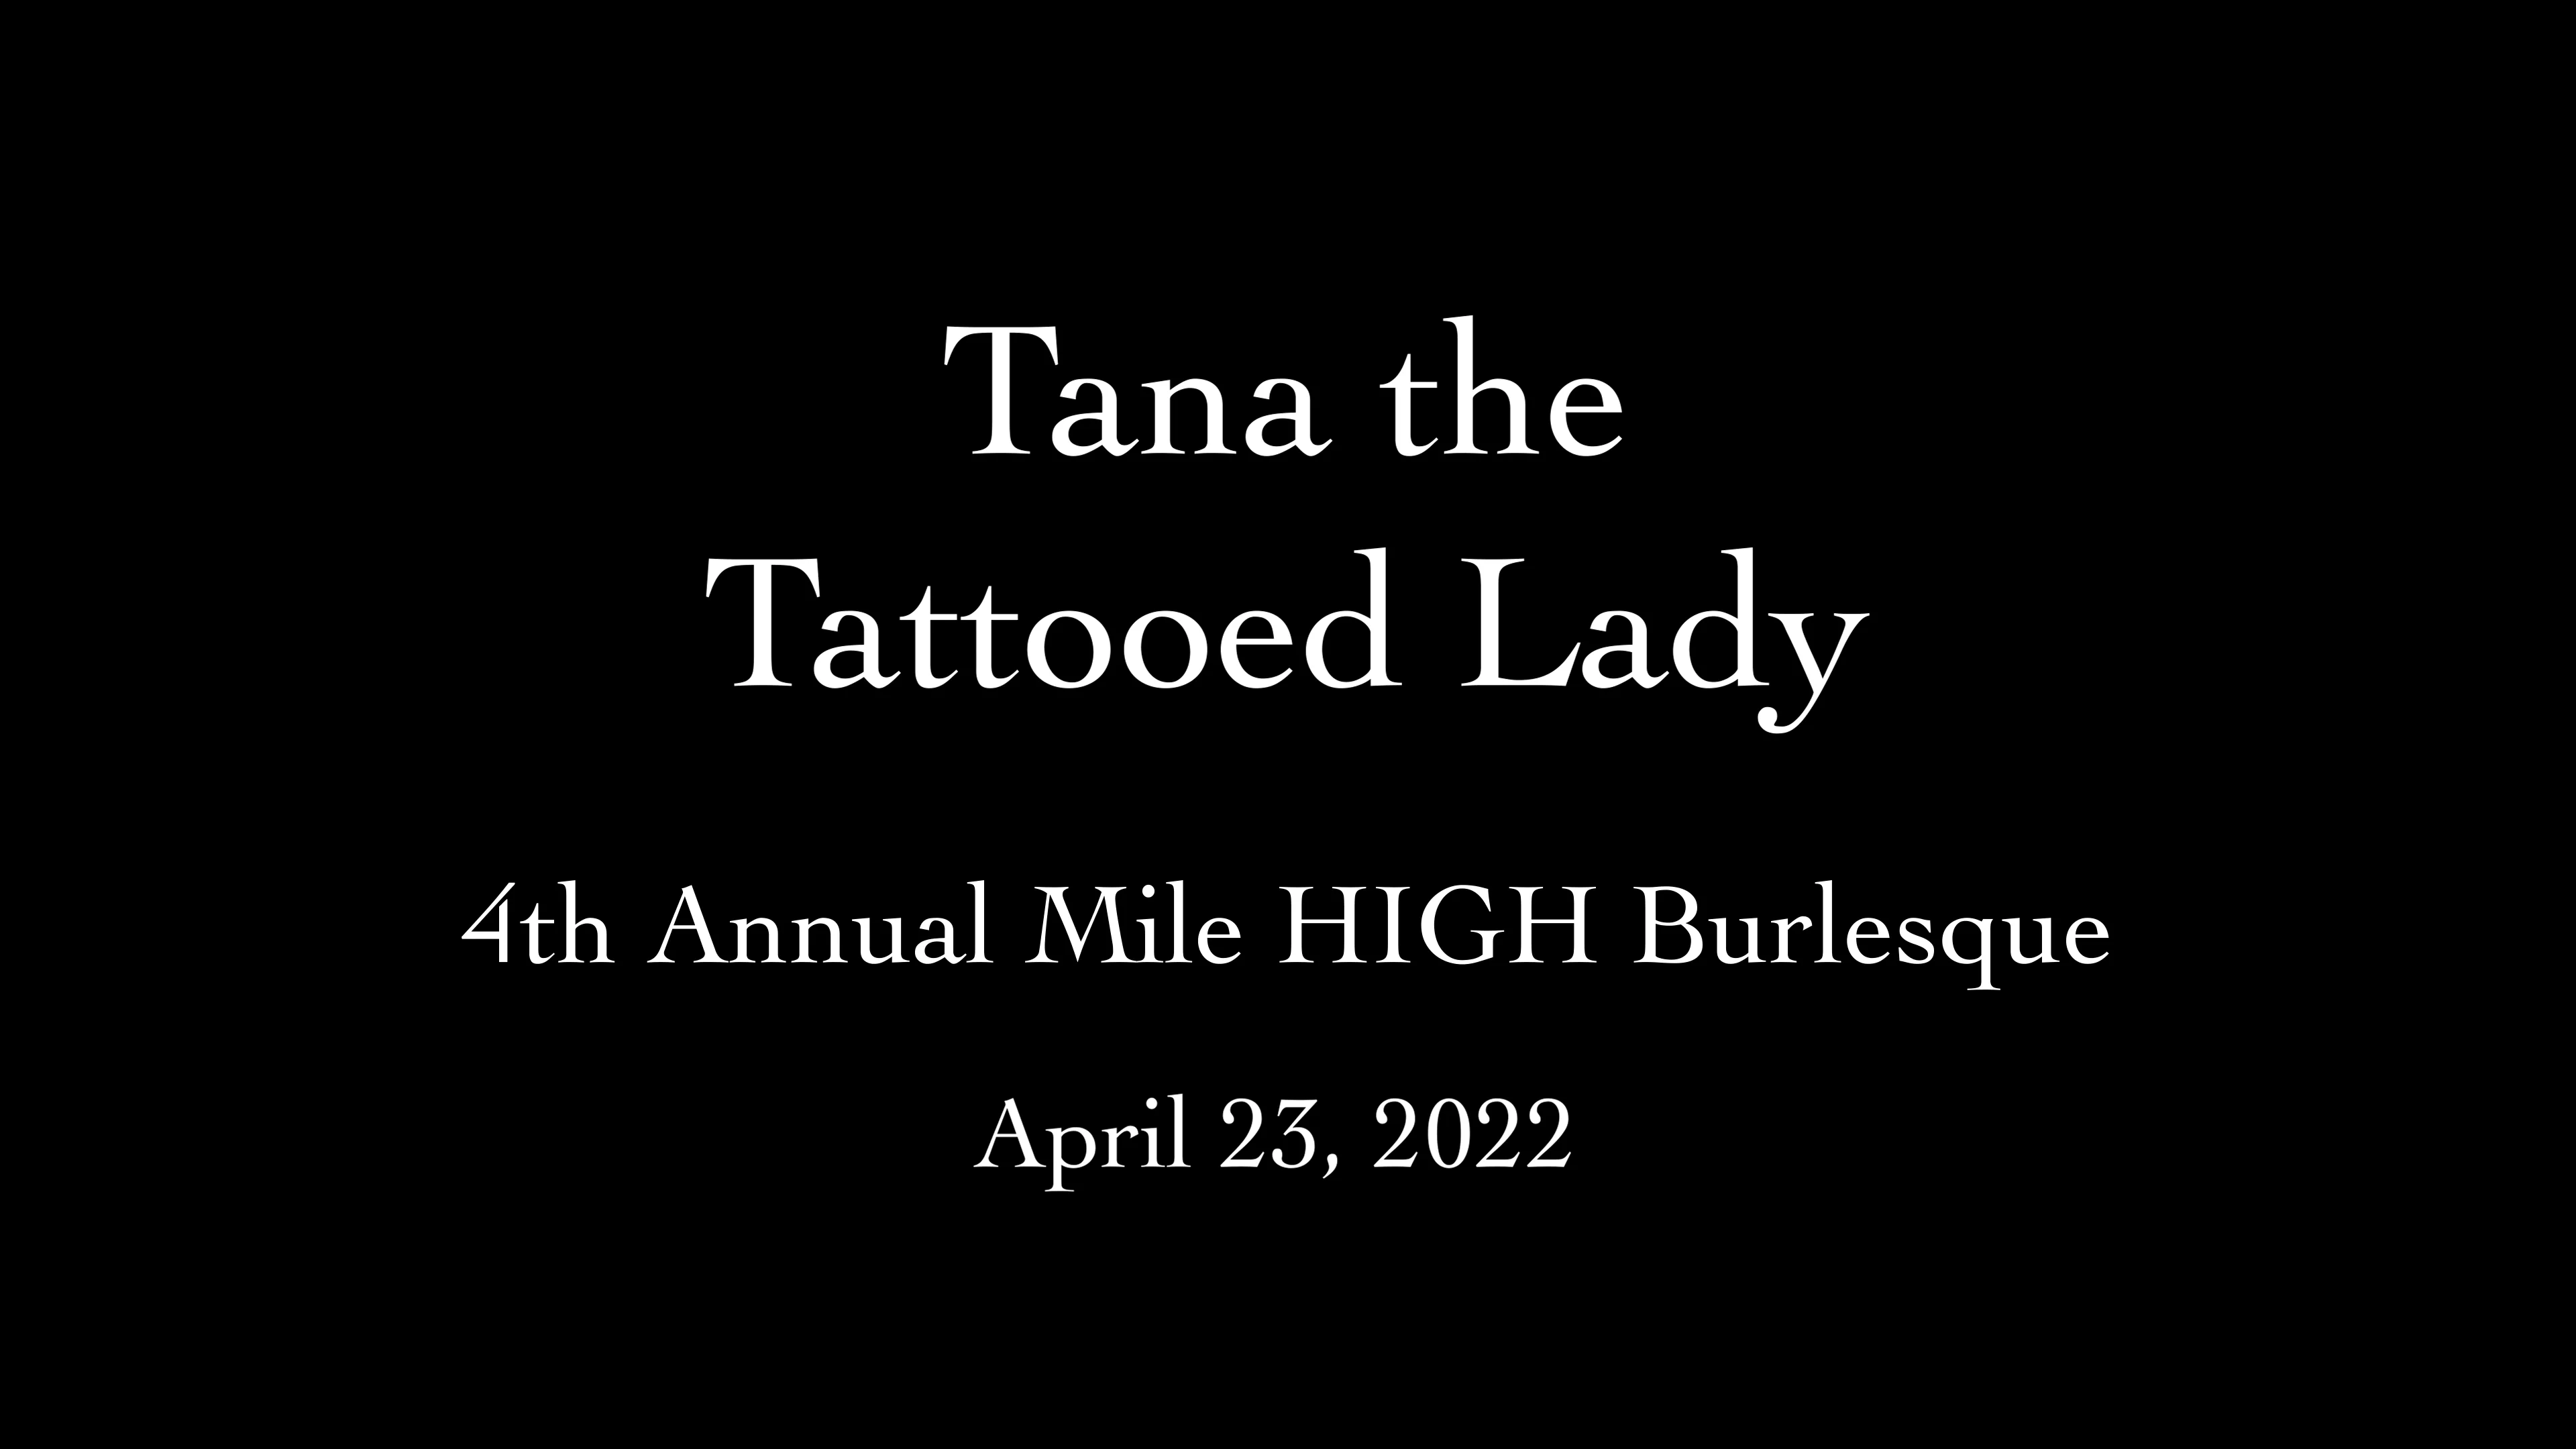 bobby merrill recommends tana the tattooed lady pic